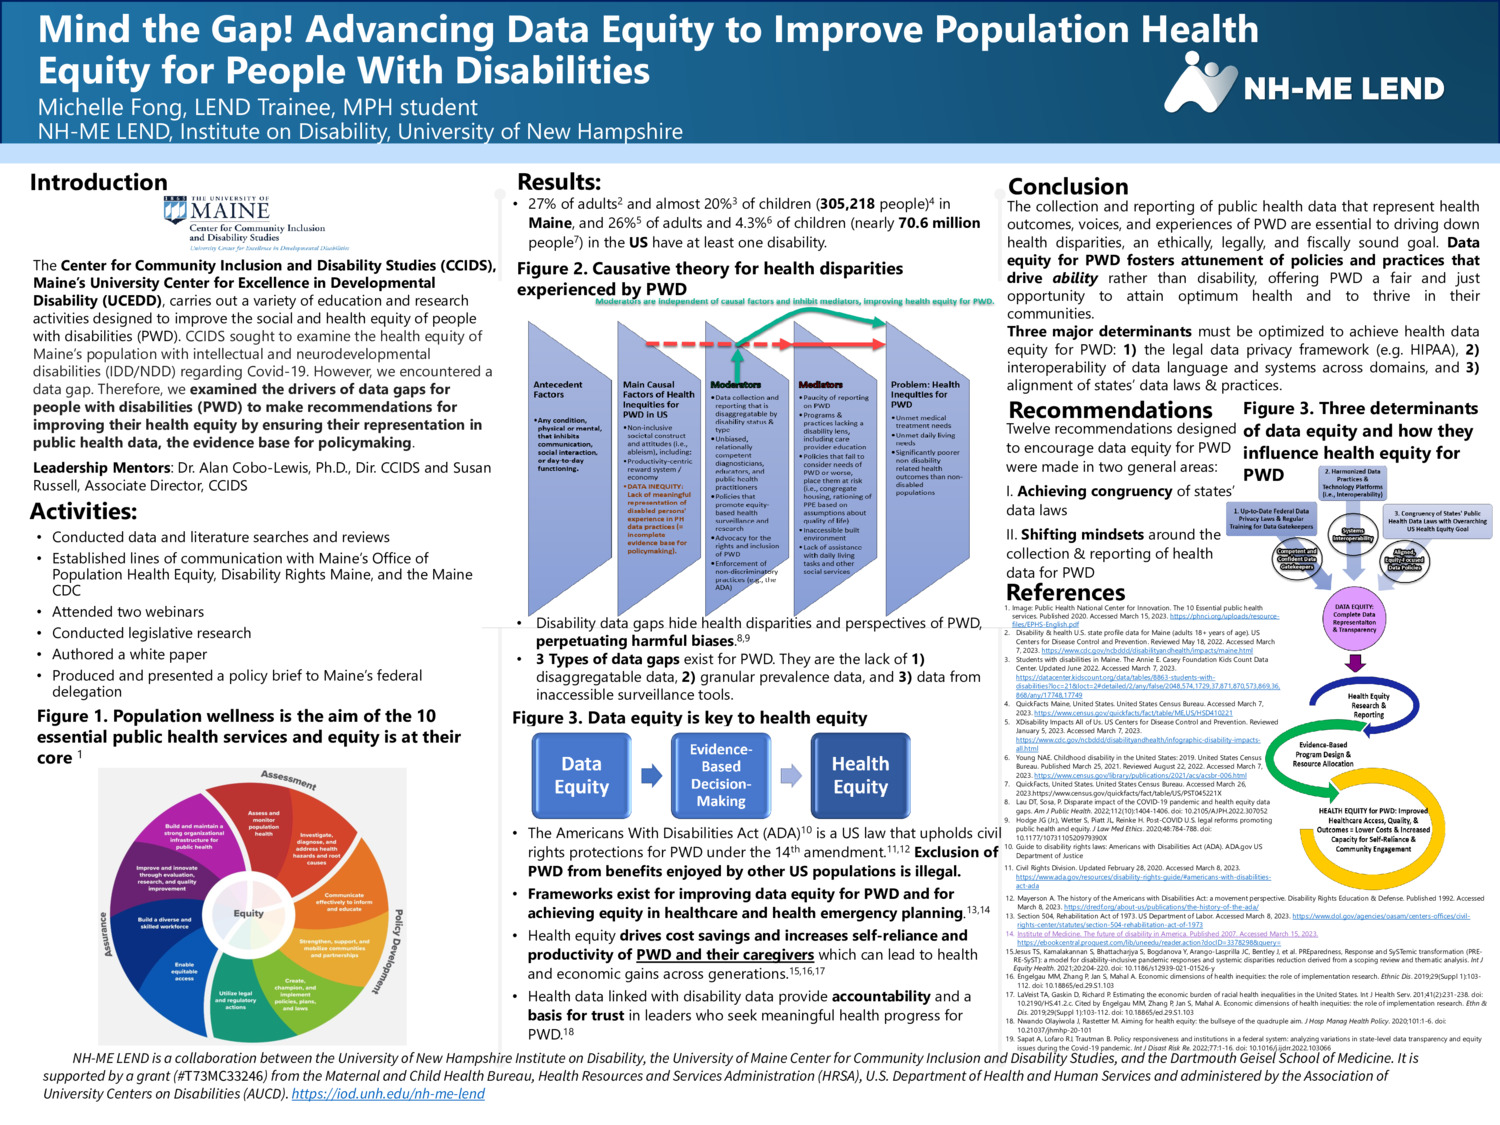 Mind The Gap! Advancing Data Equity To Improve Population Health Equity For People With Disabilities by mxf1419